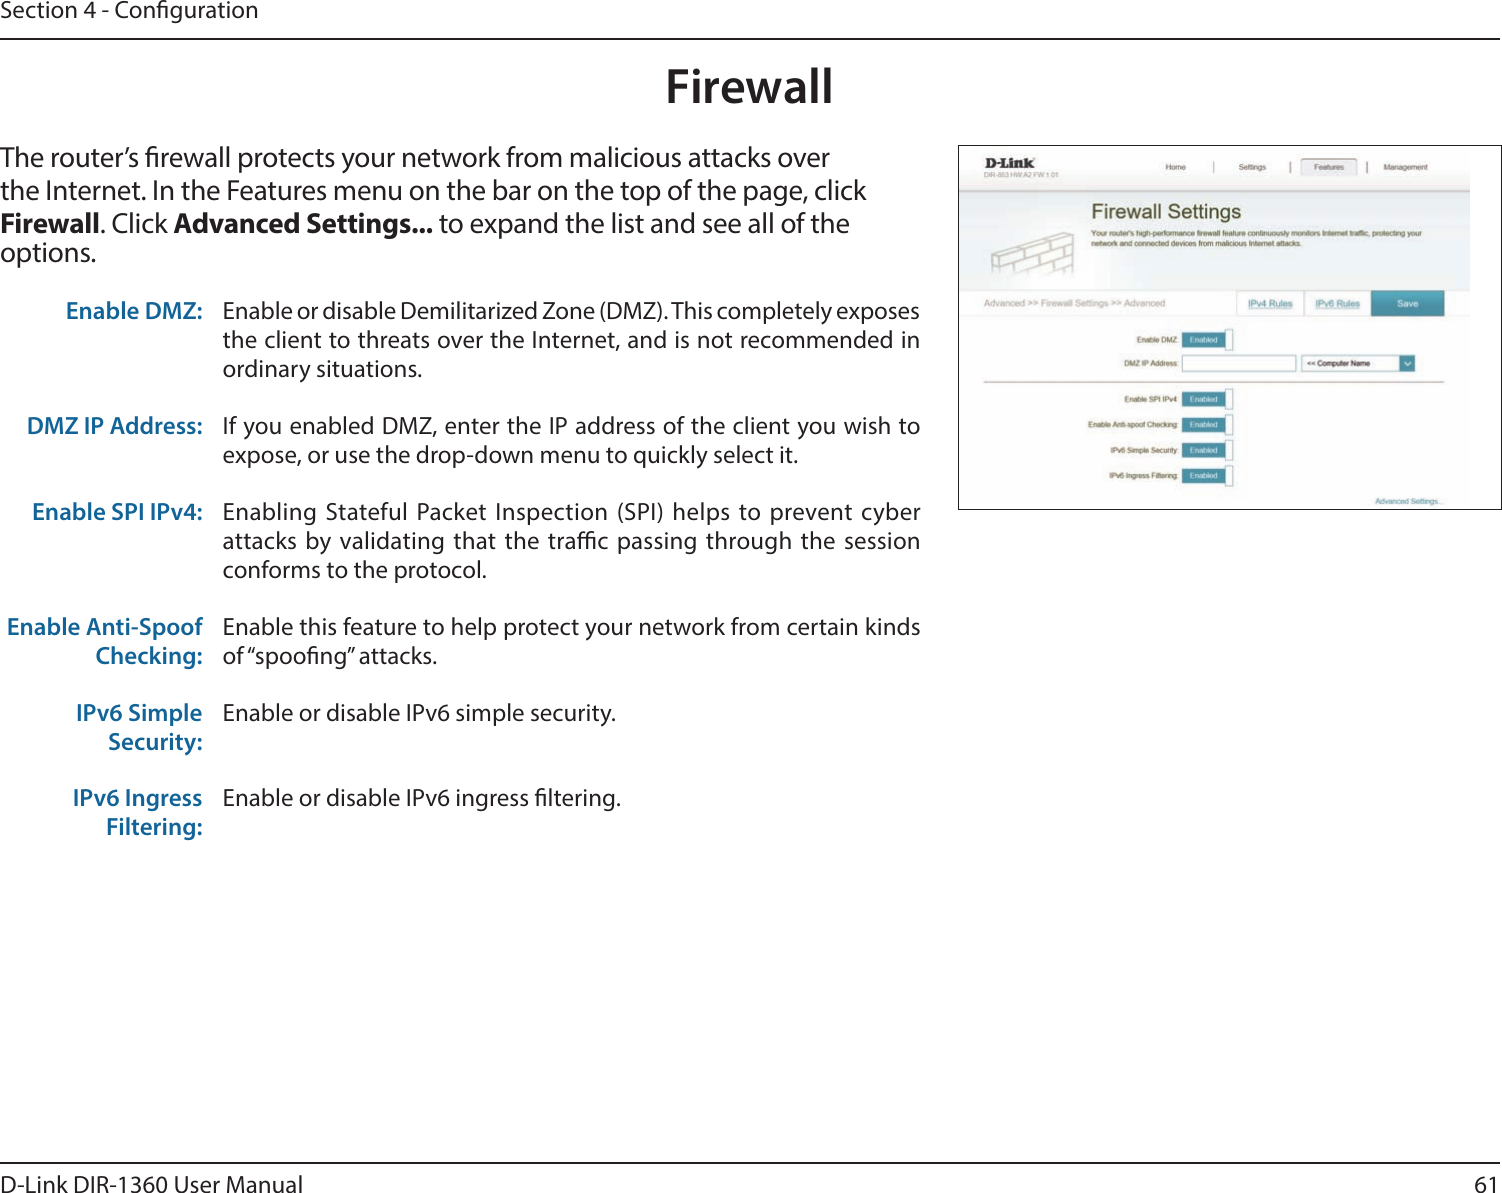 61D-Link DIR-1360 User ManualSection 4 - CongurationFirewallThe router’s rewall protects your network from malicious attacks over the Internet. In the Features menu on the bar on the top of the page, click Firewall. Click Advanced Settings... to expand the list and see all of the options. Enable DMZ: Enable or disable Demilitarized Zone (DMZ). This completely exposes the client to threats over the Internet, and is not recommended in ordinary situations.DMZ IP Address: If you enabled DMZ, enter the IP address of the client you wish to expose, or use the drop-down menu to quickly select it.Enable SPI IPv4: Enabling Stateful Packet Inspection (SPI) helps to prevent cyber attacks by validating that the trac passing through the session conforms to the protocol.Enable Anti-Spoof Checking:Enable this feature to help protect your network from certain kinds of “spoong” attacks.IPv6 Simple Security:Enable or disable IPv6 simple security.IPv6 Ingress Filtering:Enable or disable IPv6 ingress ltering.